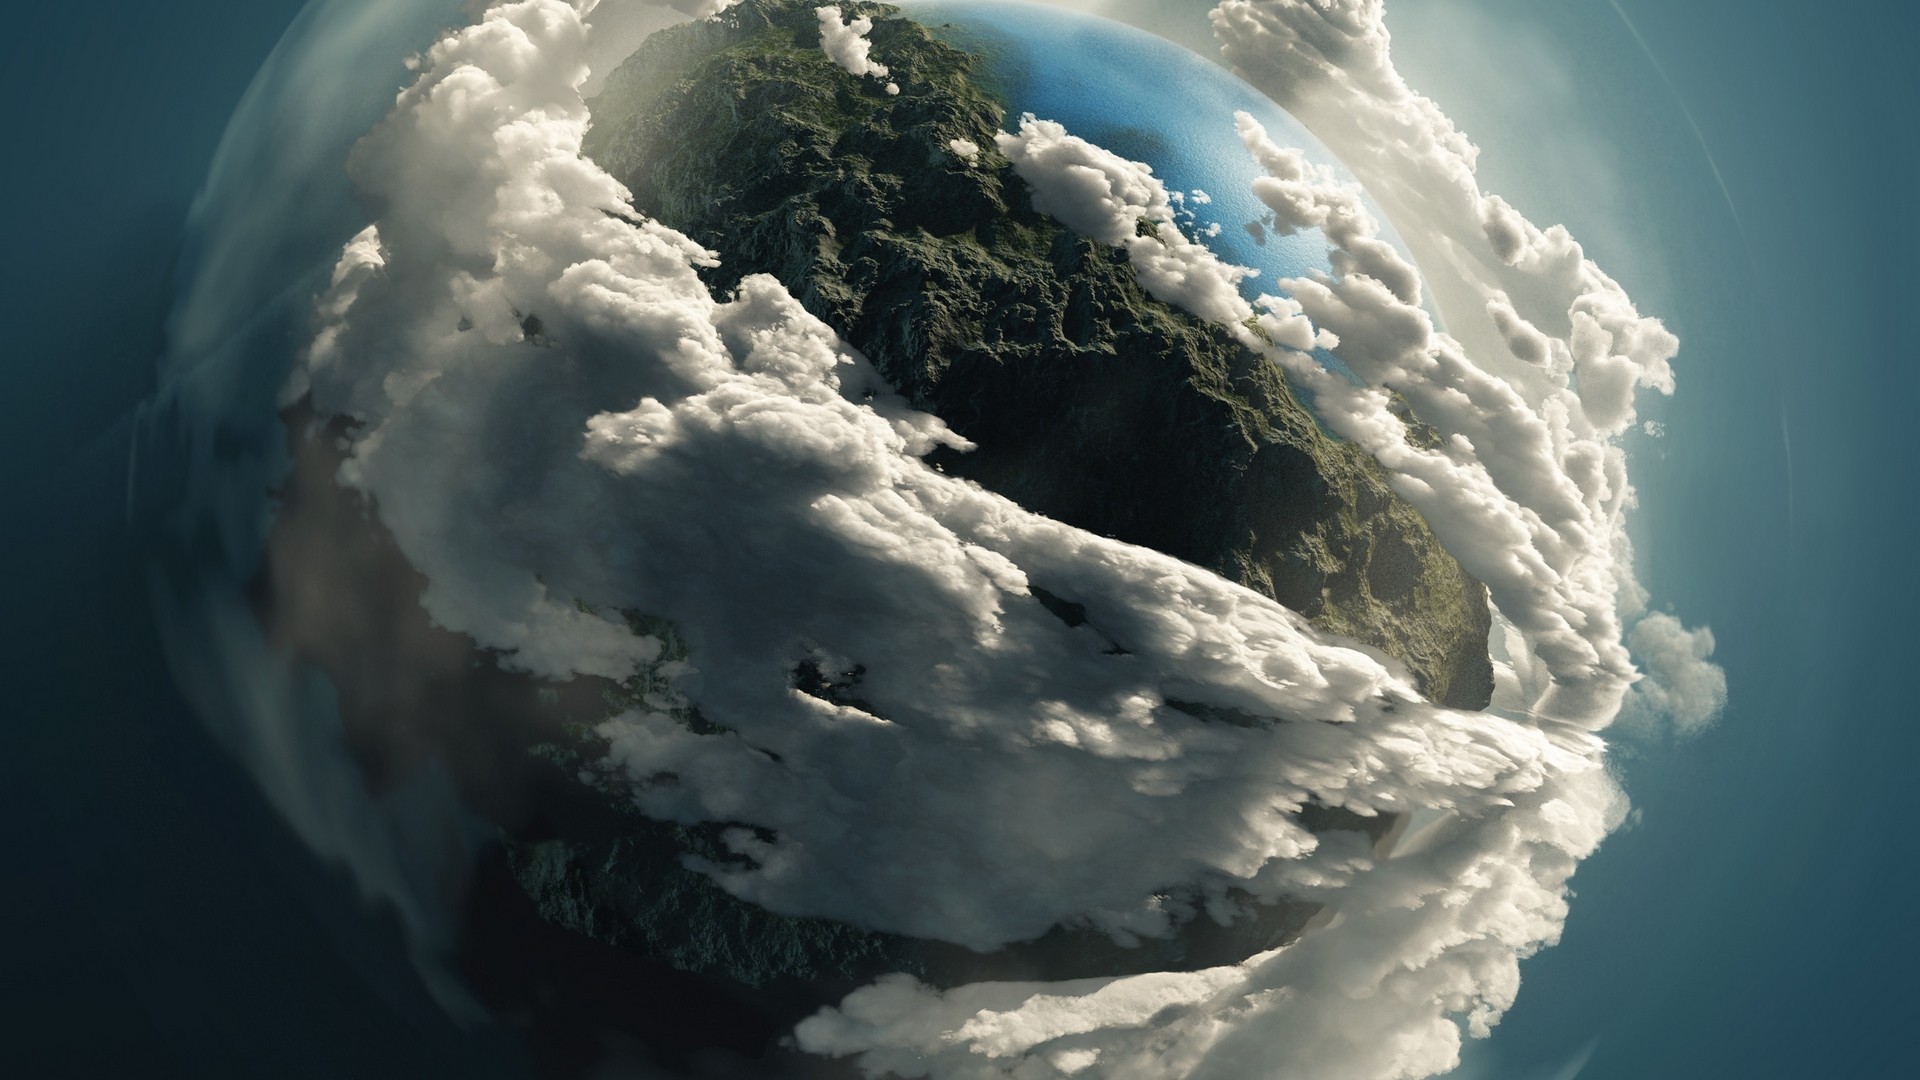 Clouds On Planet - HD Wallpaper 